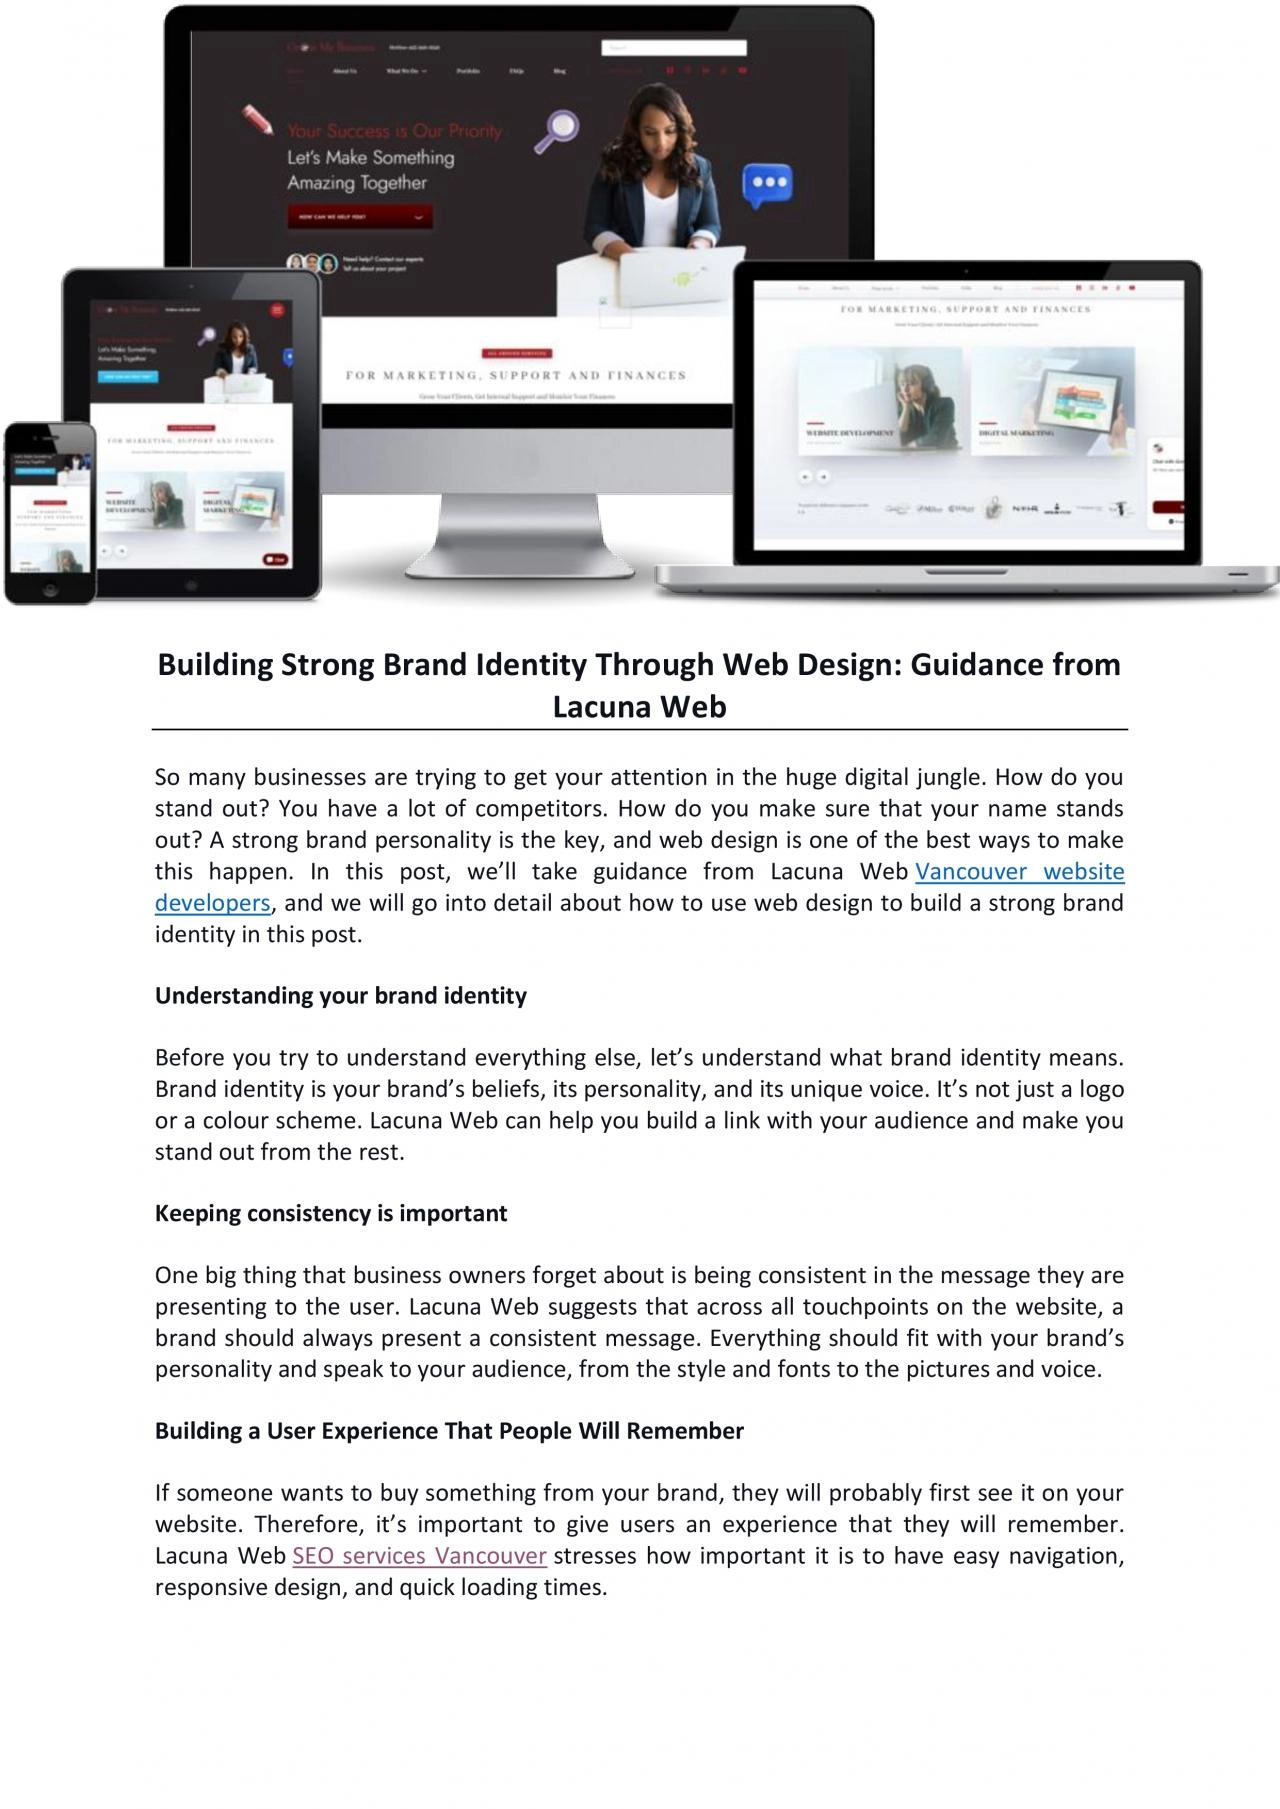 Building Strong Brand Identity Through Web Design: Guidance from Lacuna Web